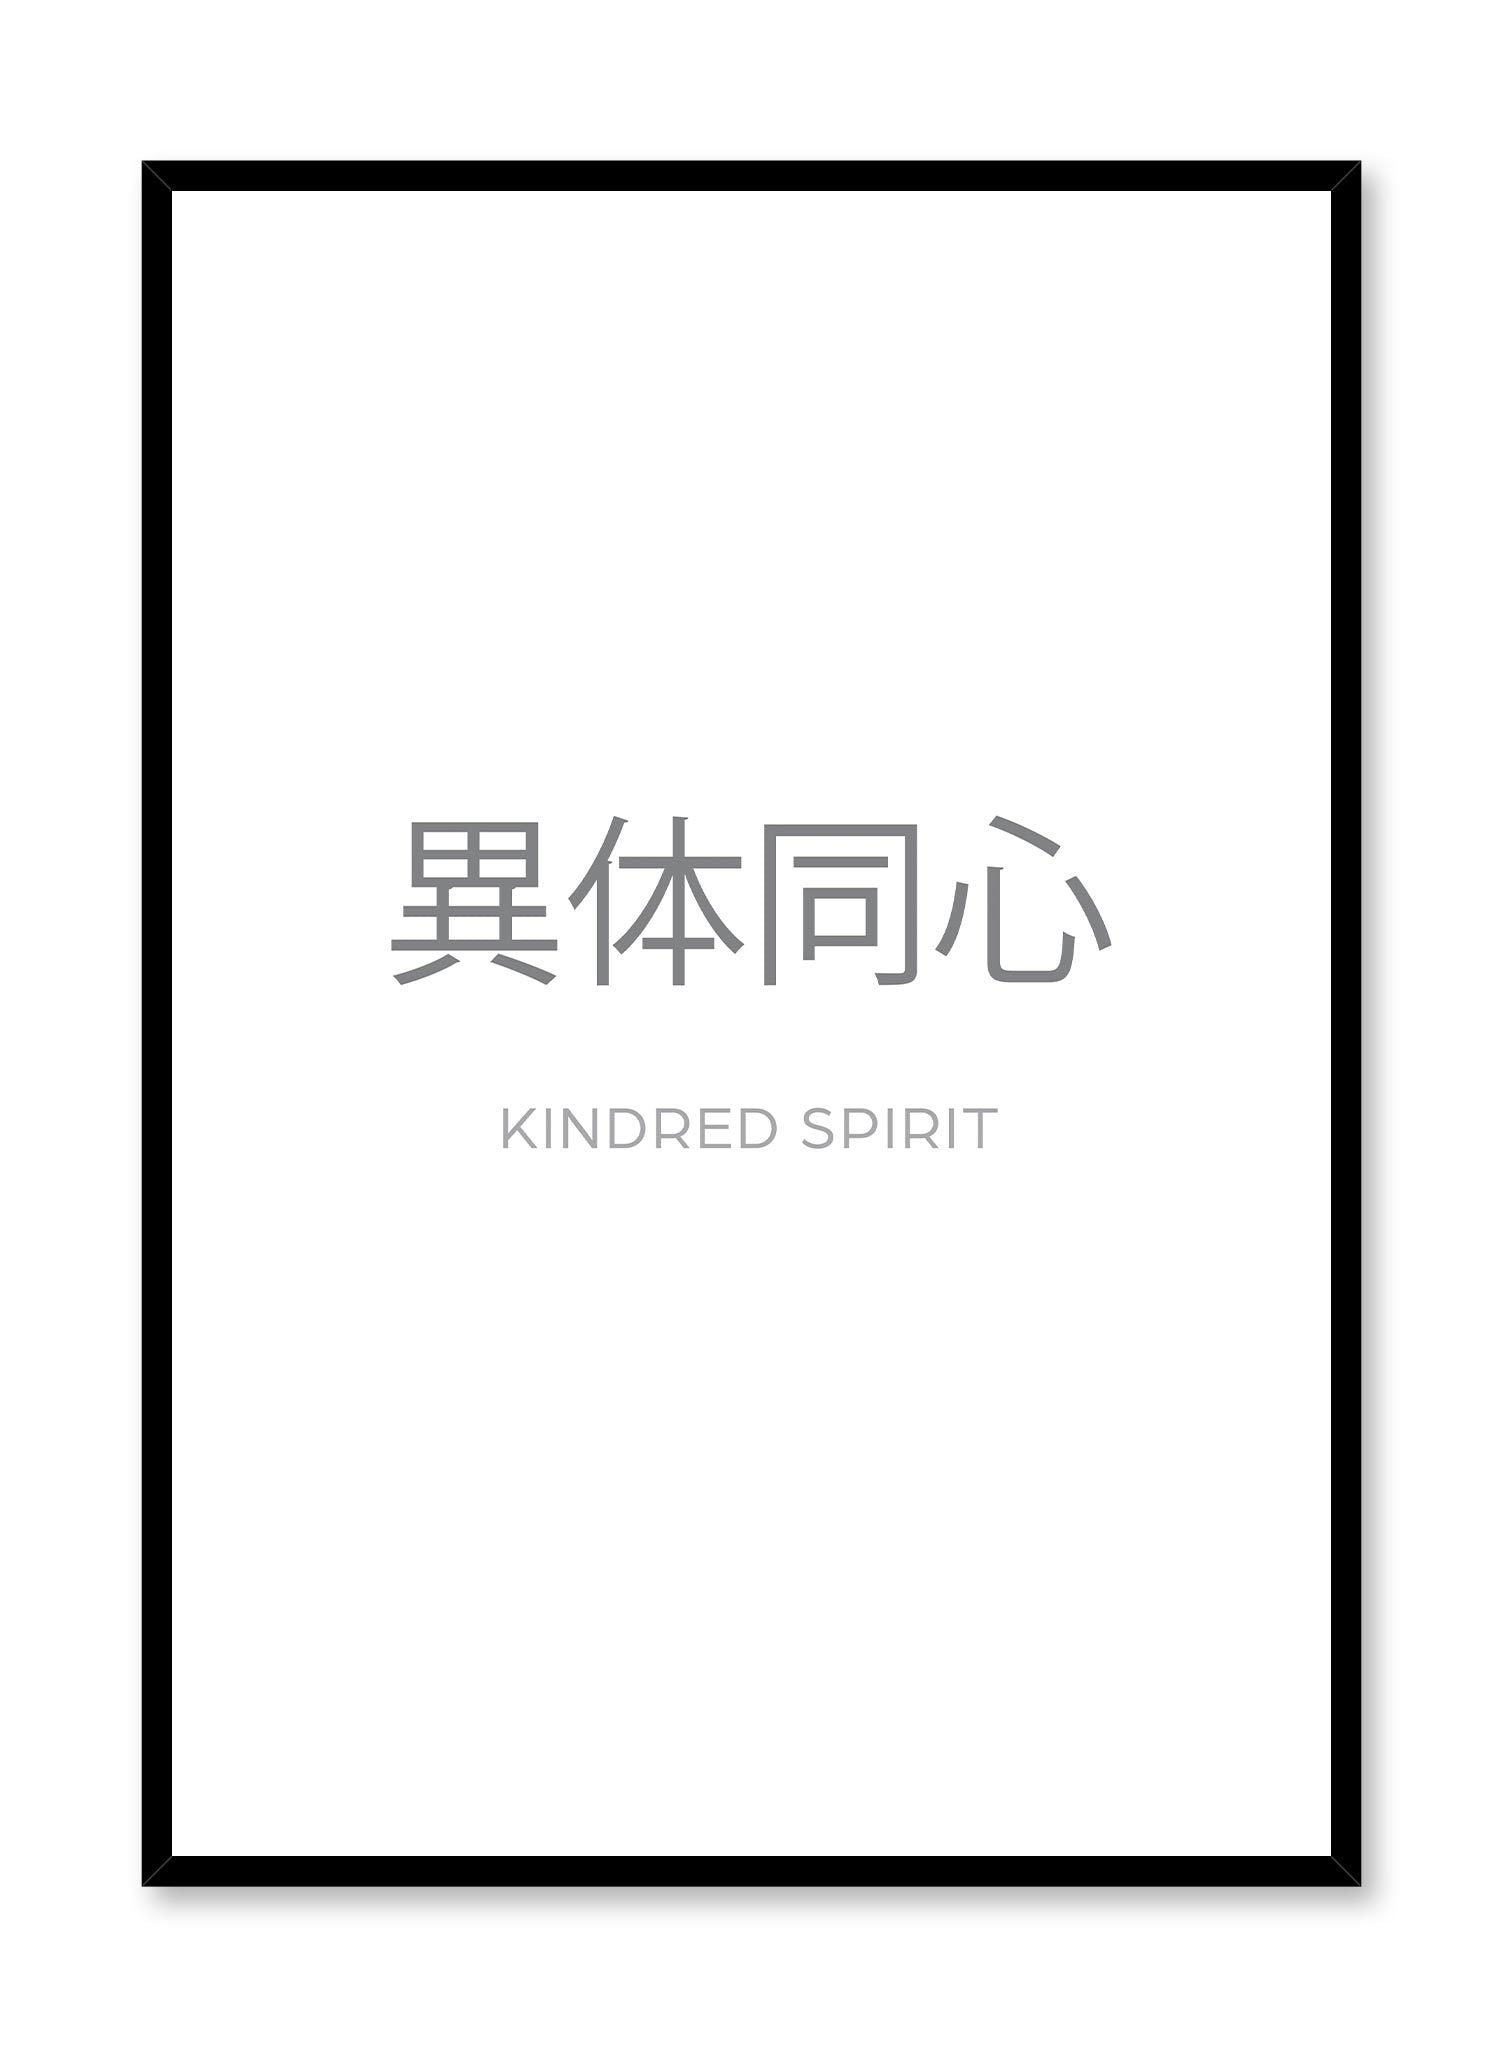 Kindred Spirit is a minimalist typography by Opposite Wall of the words “Kindred spirit” written in Japanese and English.